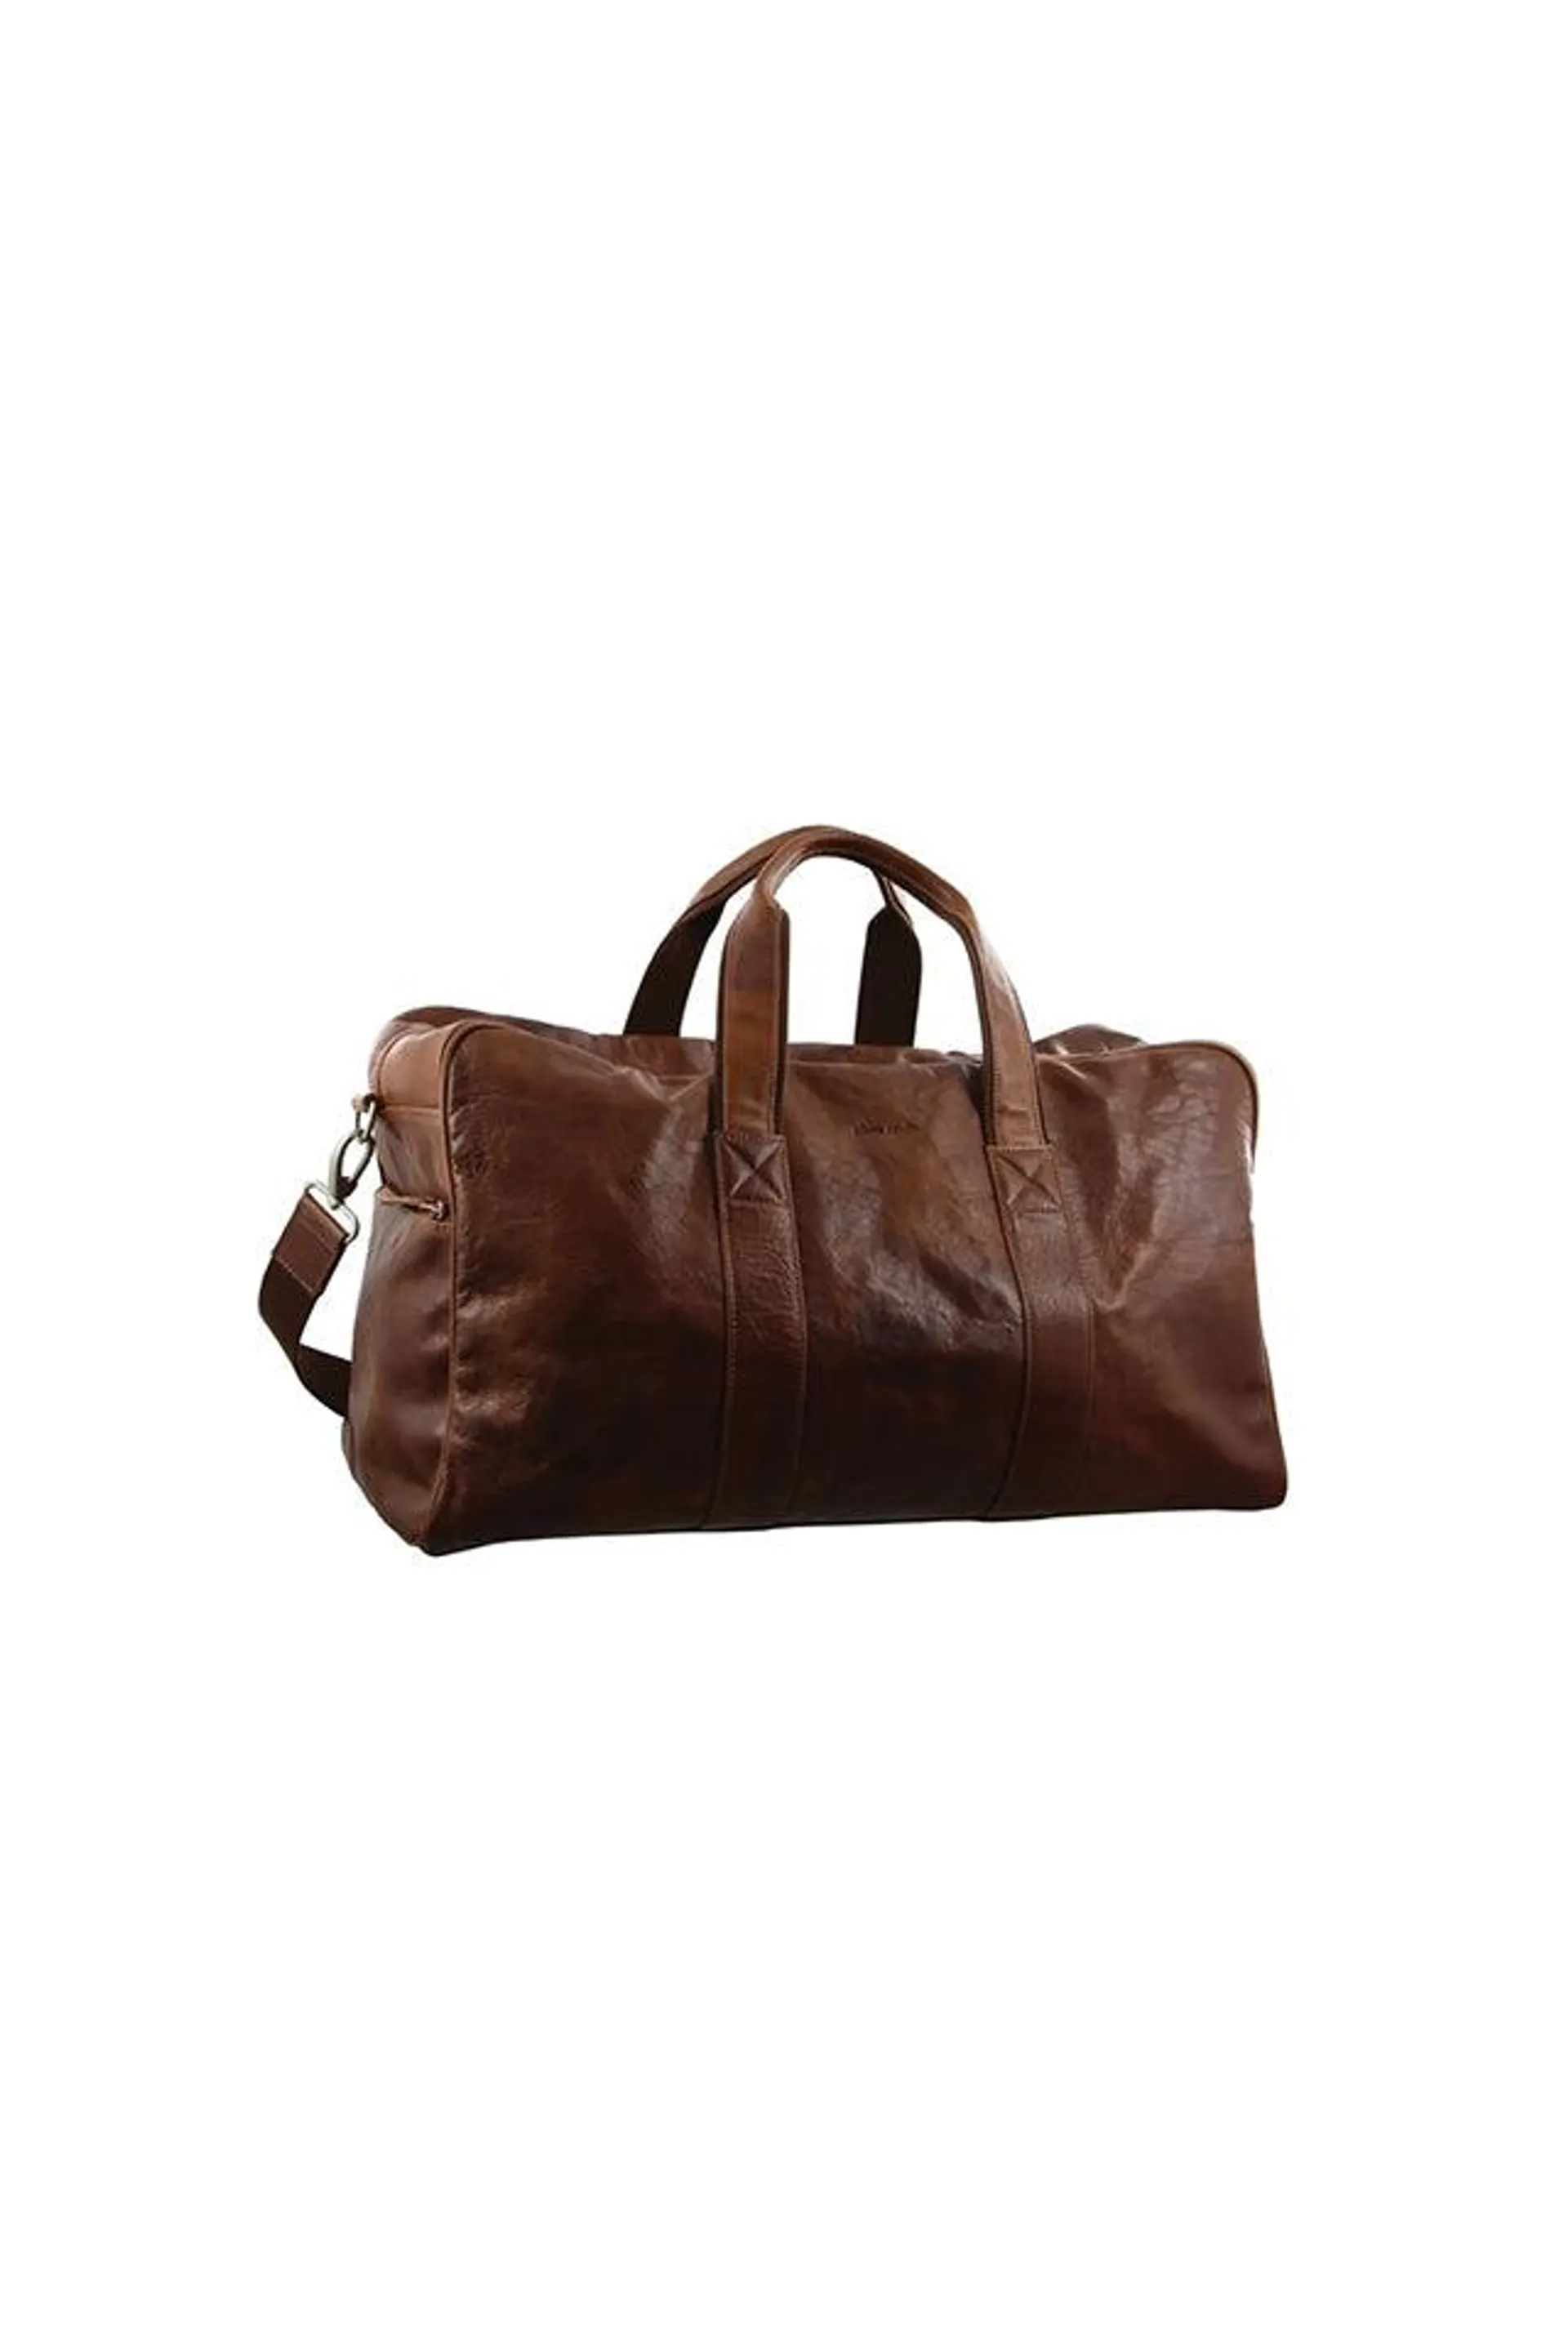 Rustic Leather Overnight Bag